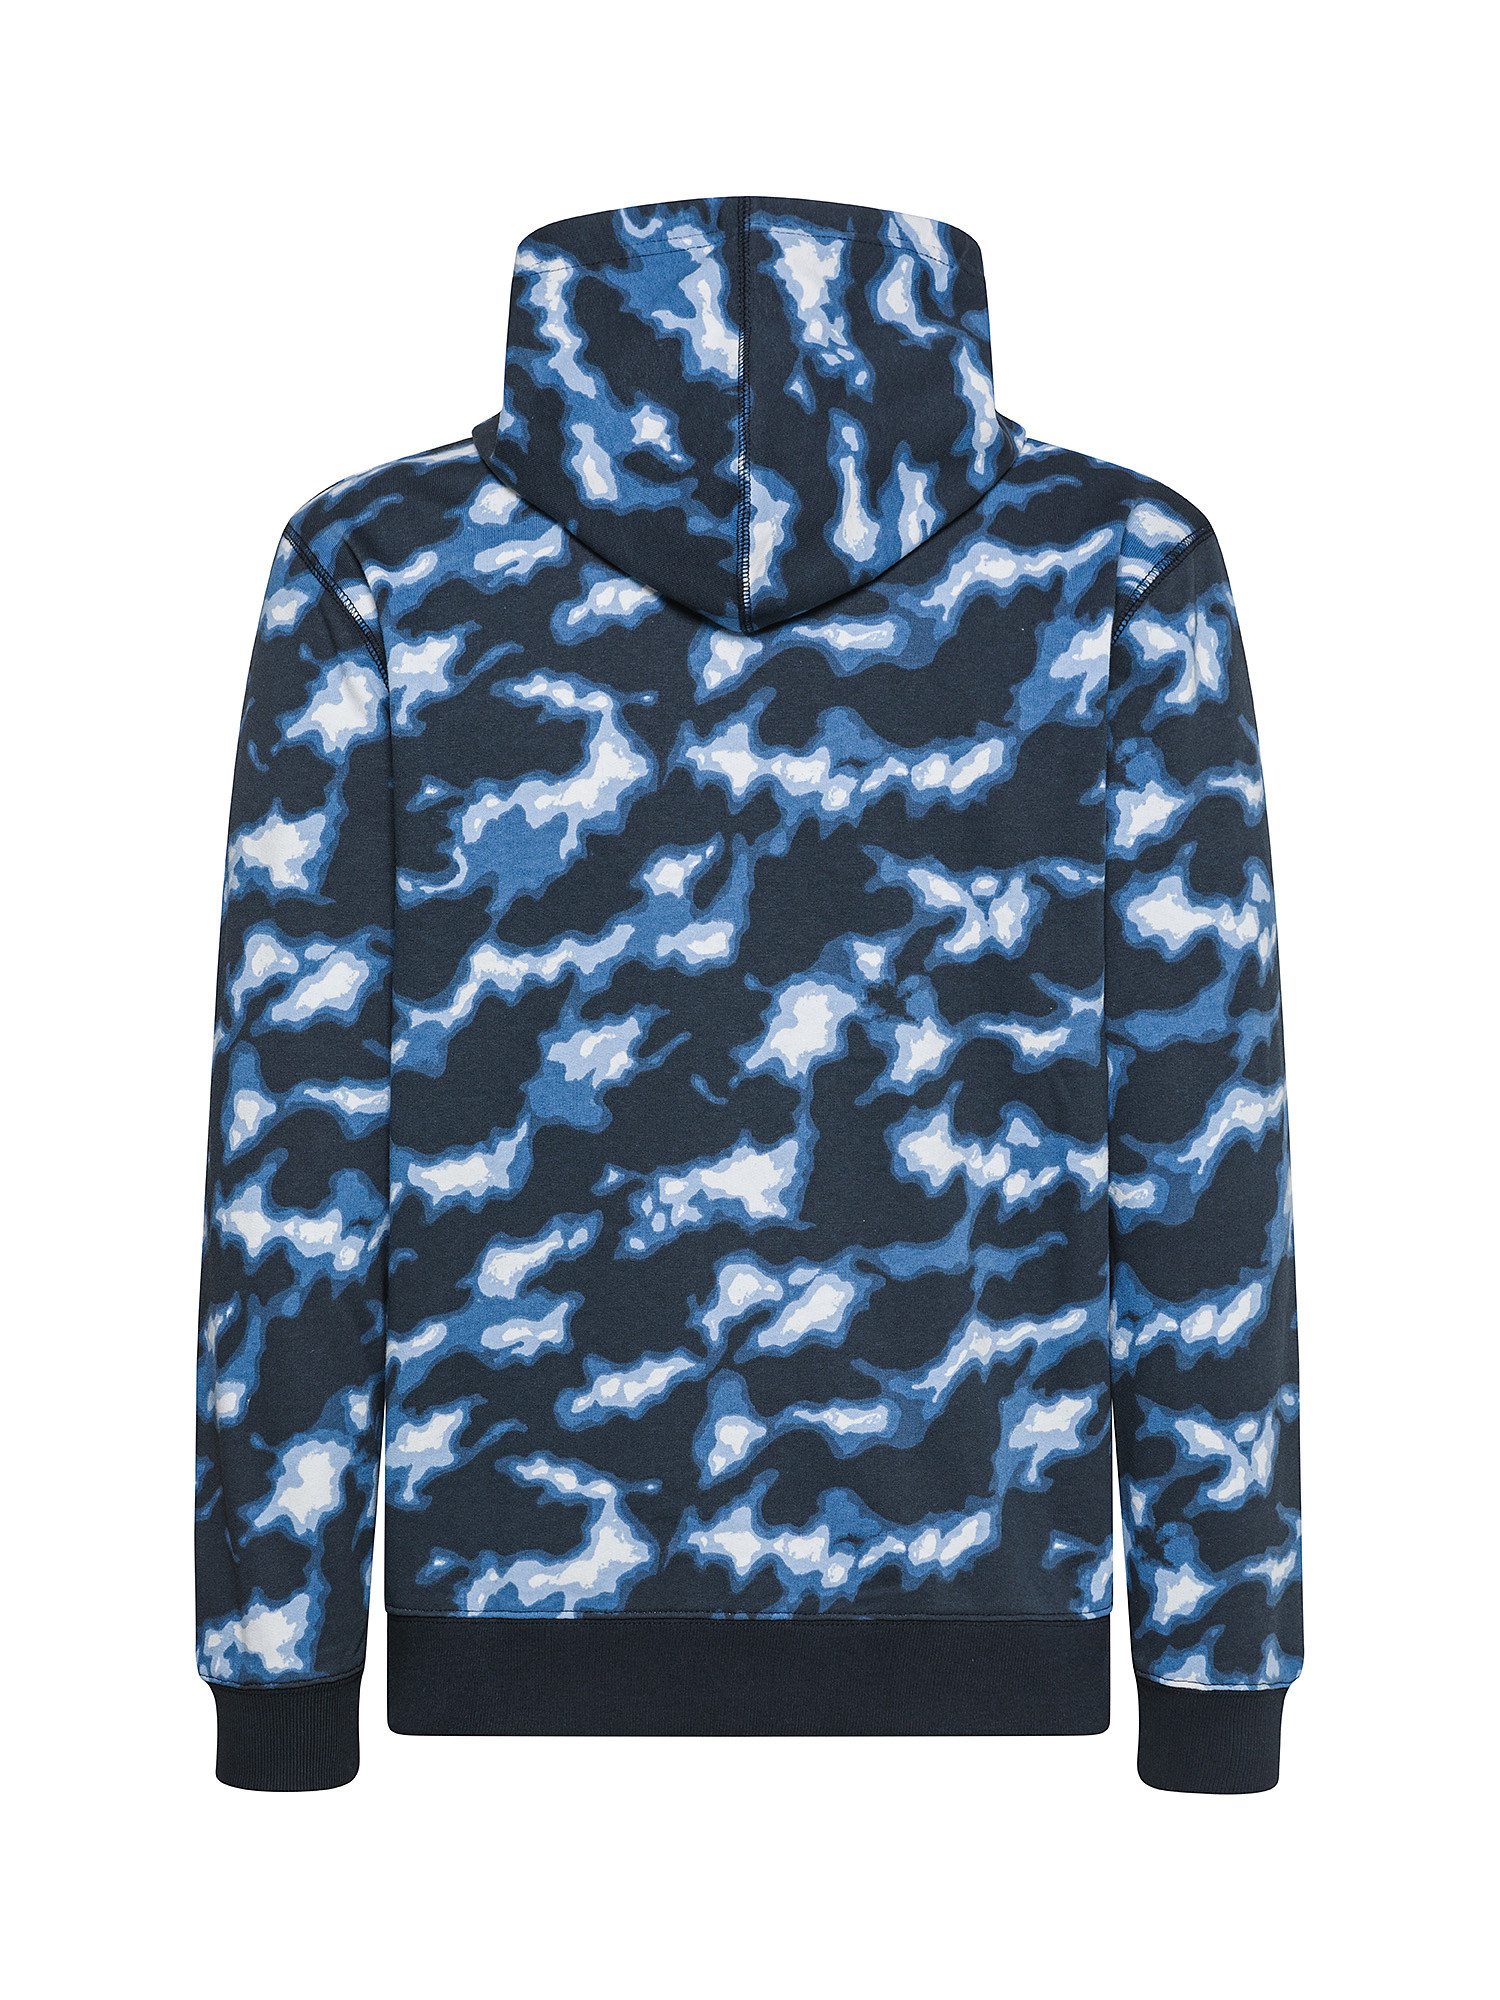 Pepe Jeans - Felpa con stampa camouflage, Blu scuro, large image number 1